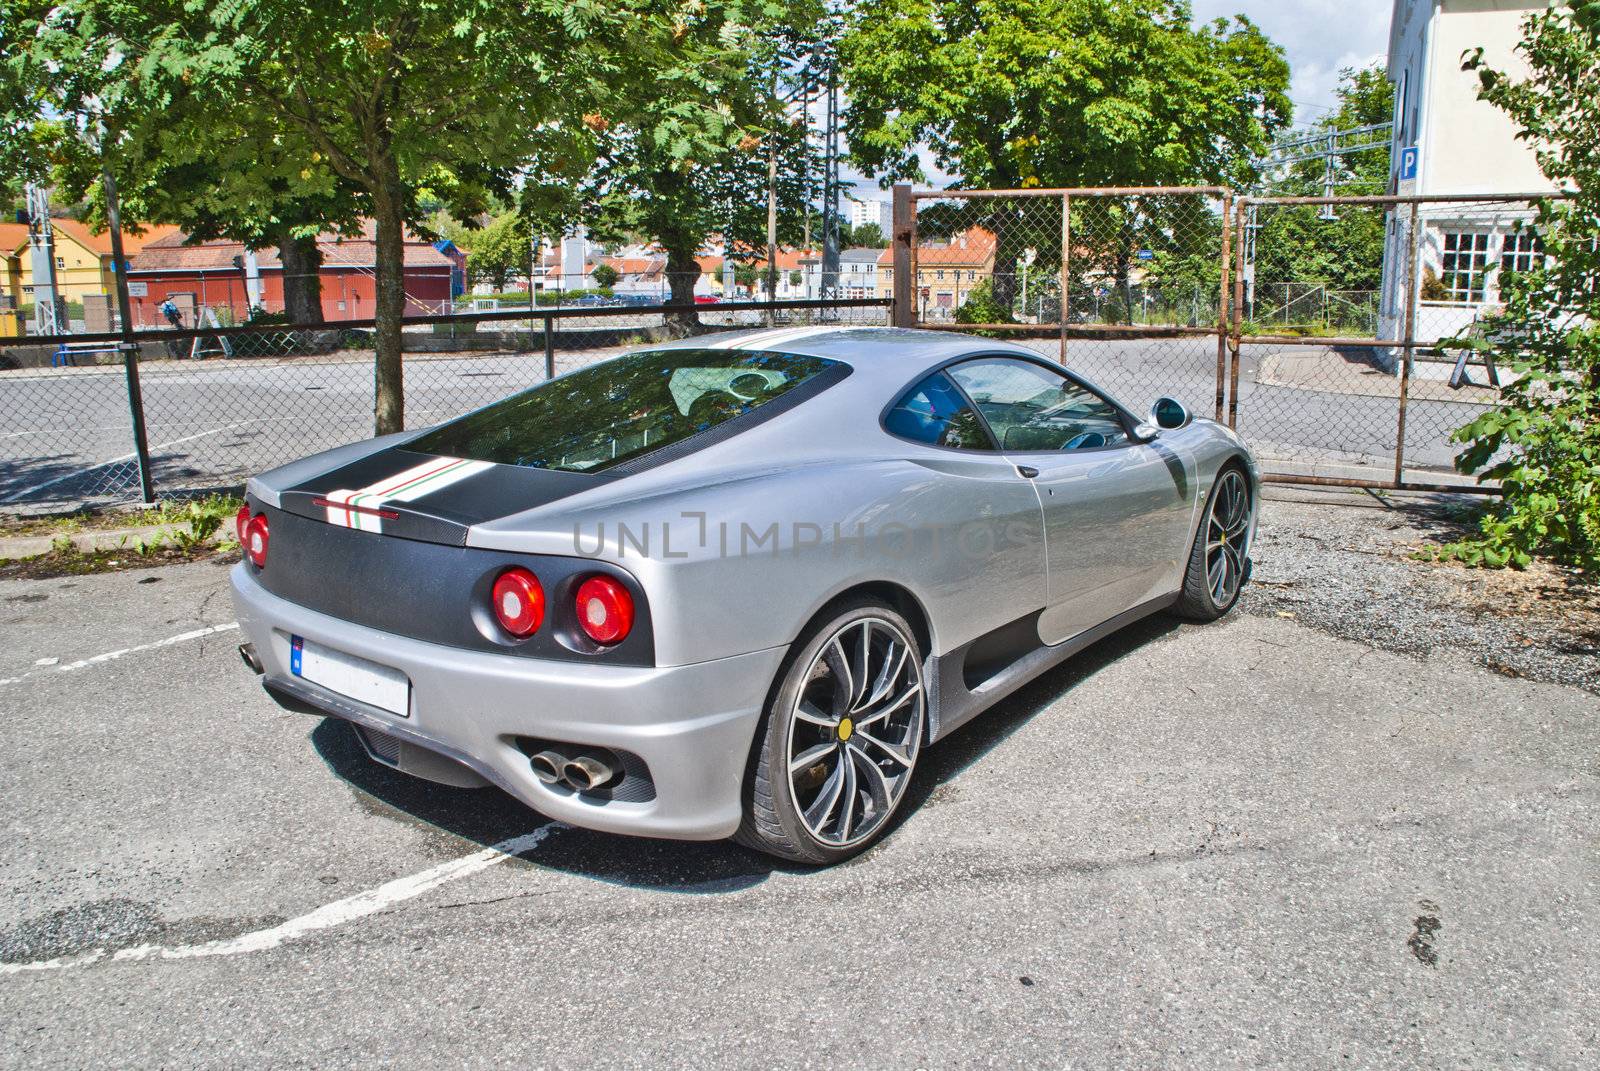 the ferrari 360 is a 2 seater sports car built by ferrari from 1999 to 2005, it succeeded the ferrari f355 and was replaced by the ferrari f430, it is a mid-engined, rear wheel drive v8-powered coupe, image is shot in July 2012 at halden station